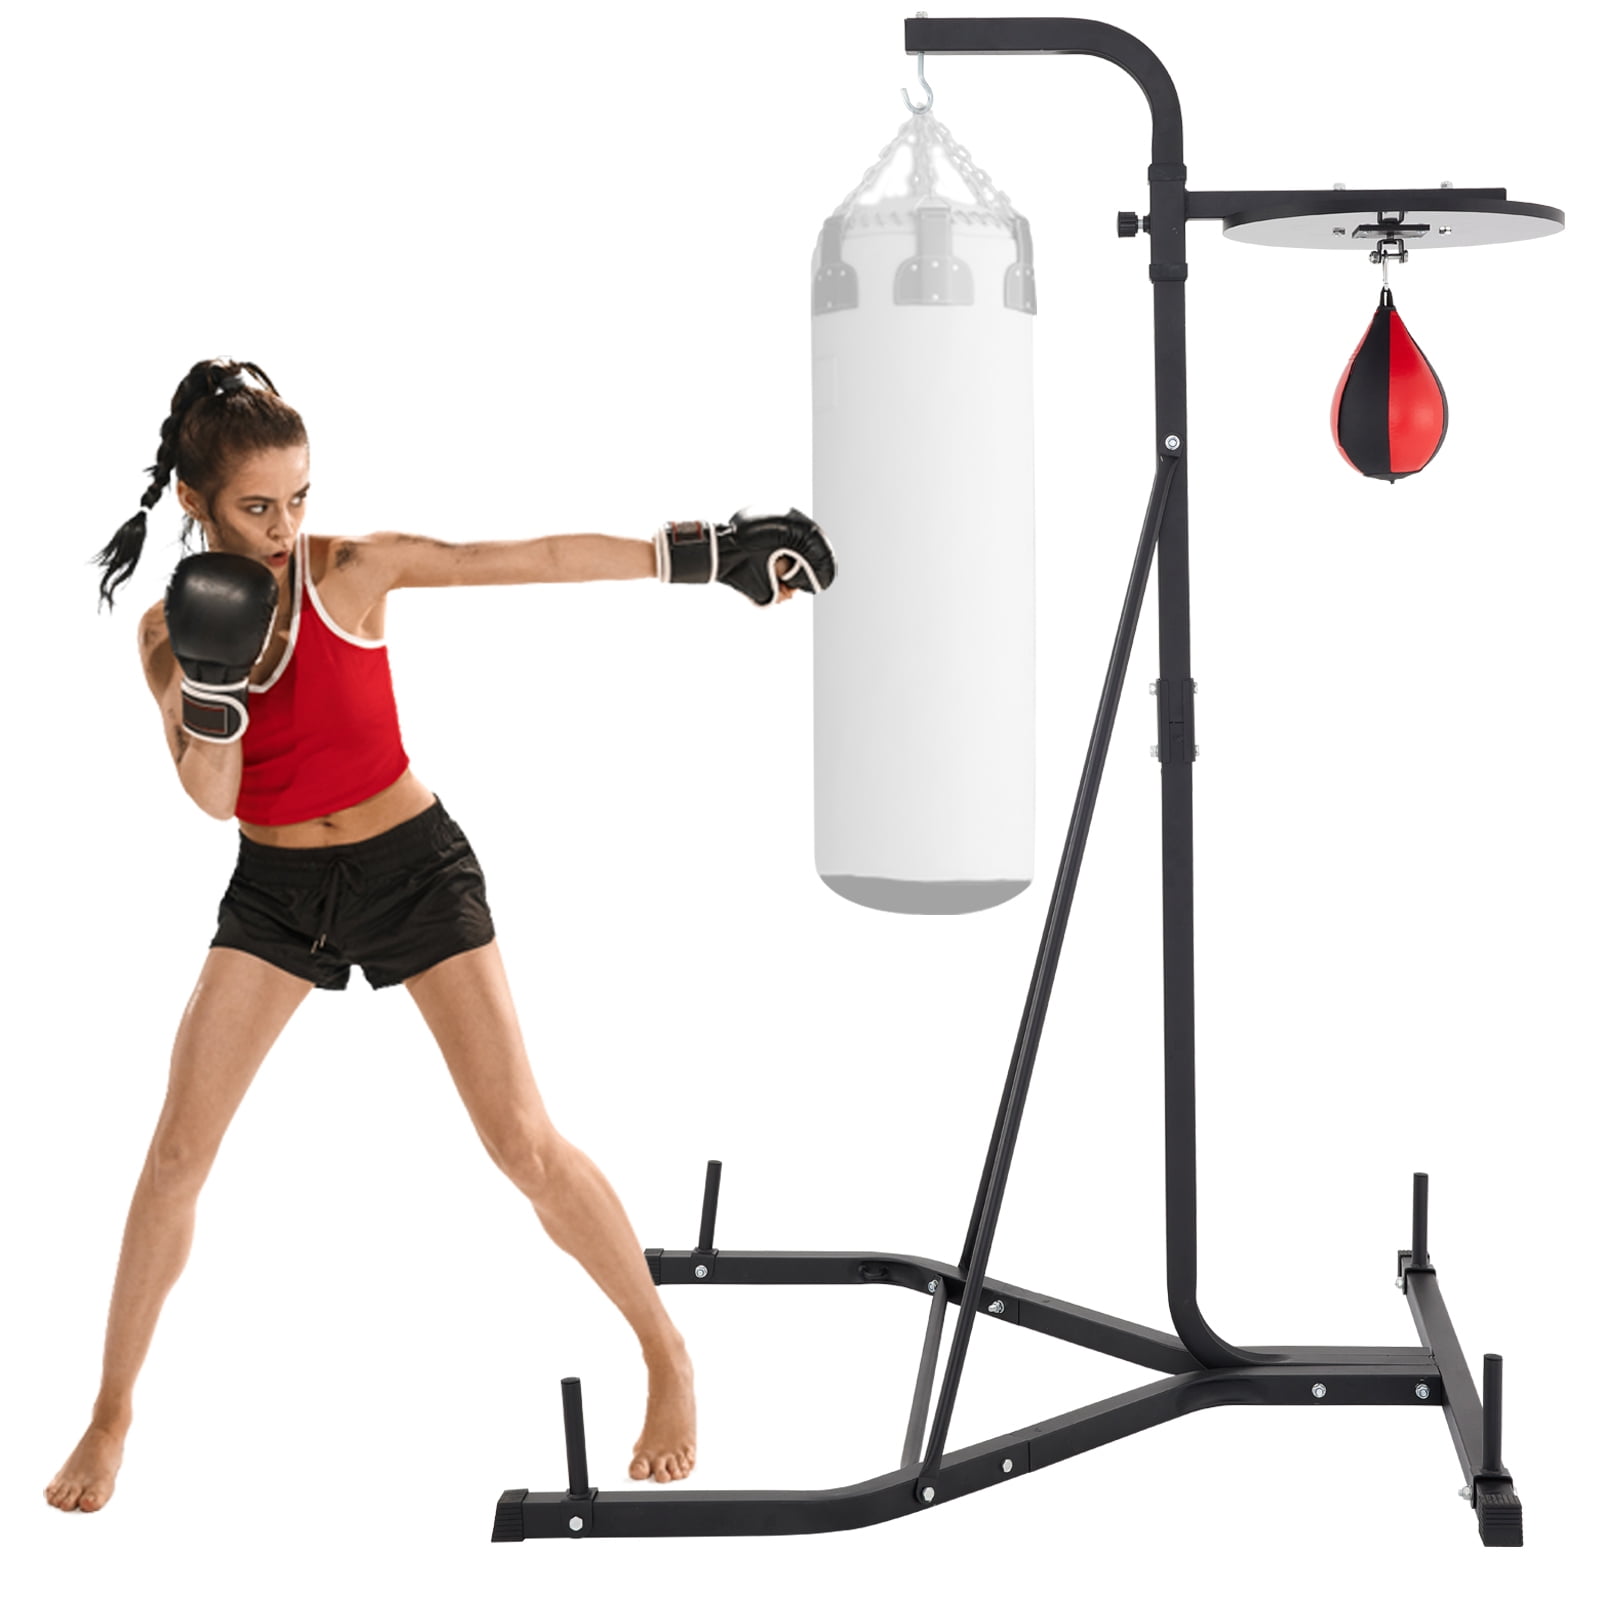 Is It Safe To Hang A Punching Bag In Garage Or Basement (from The Ceiling)?